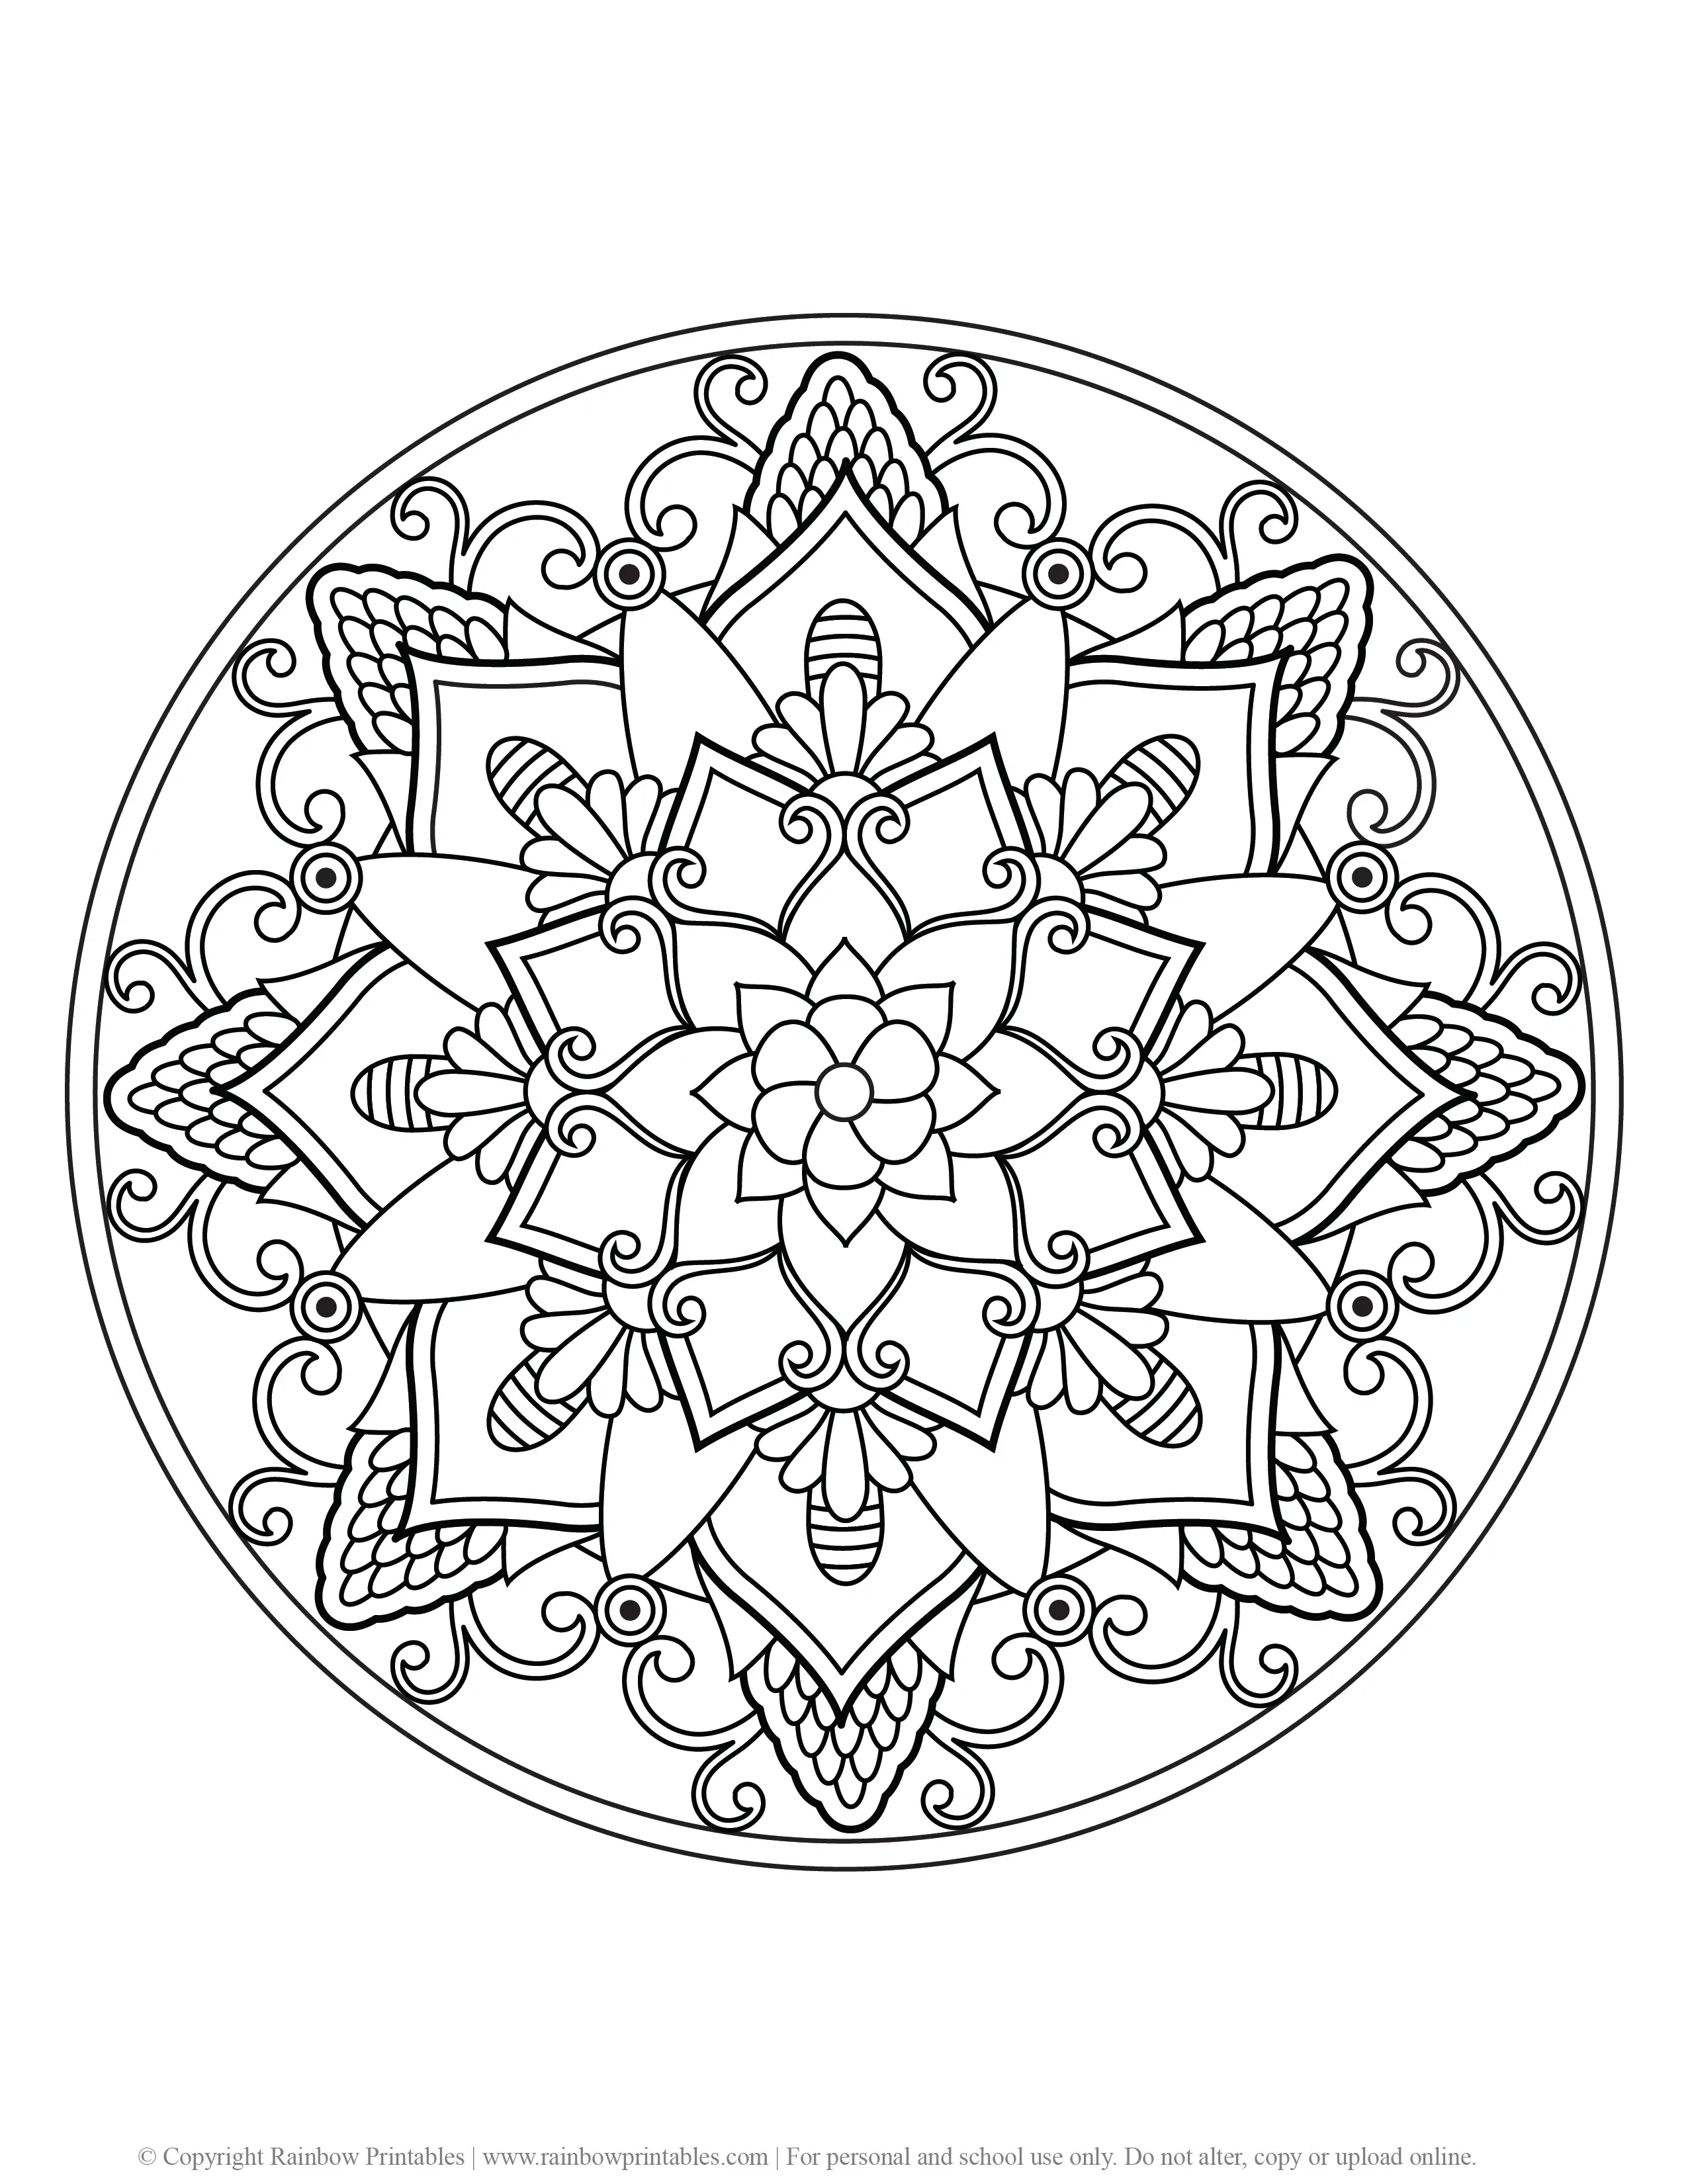 FLOWER MANDALA COLORING PAGES FOR ADULTS AND KIDS PRINTABLE